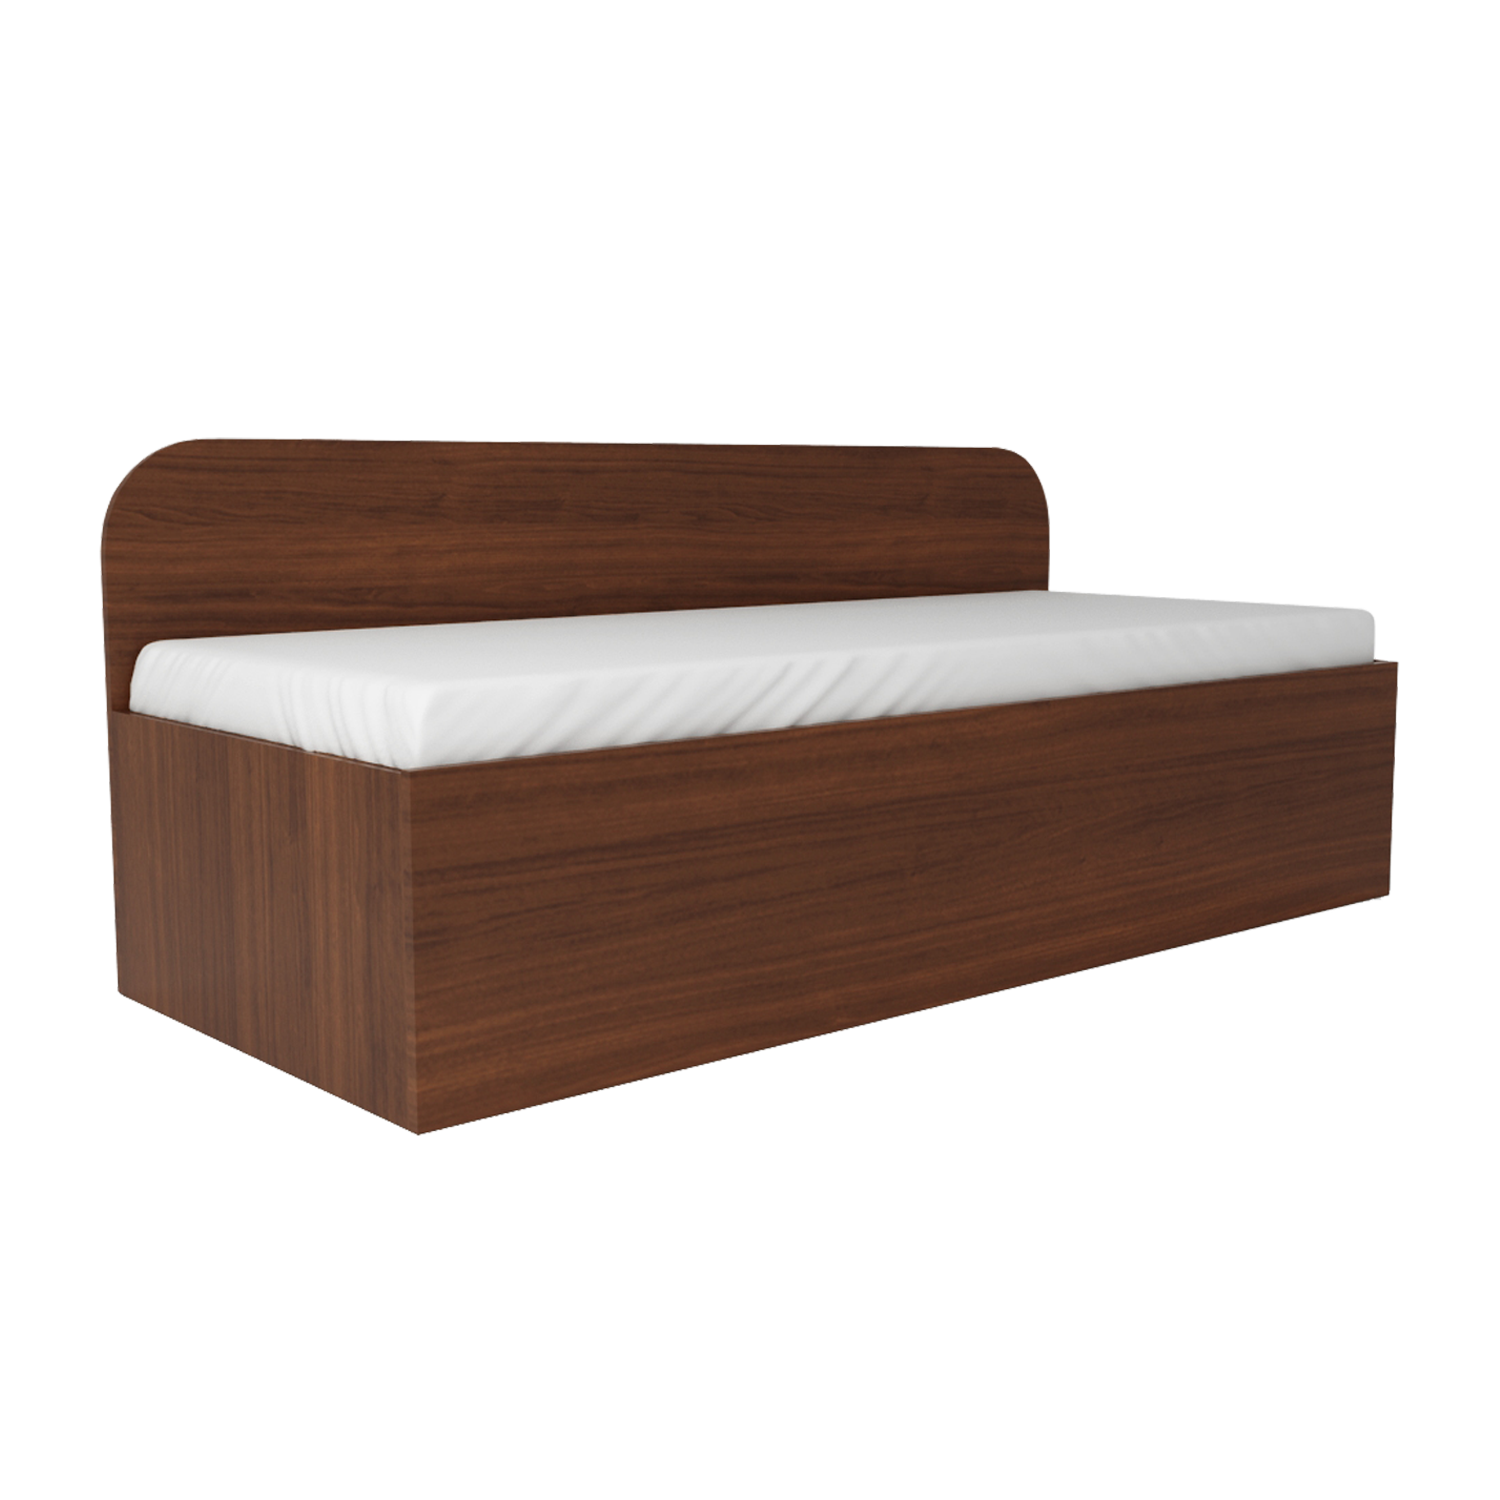 Trundle Bed Buy Trundle Beds Online At Best Prices Urban Ladder